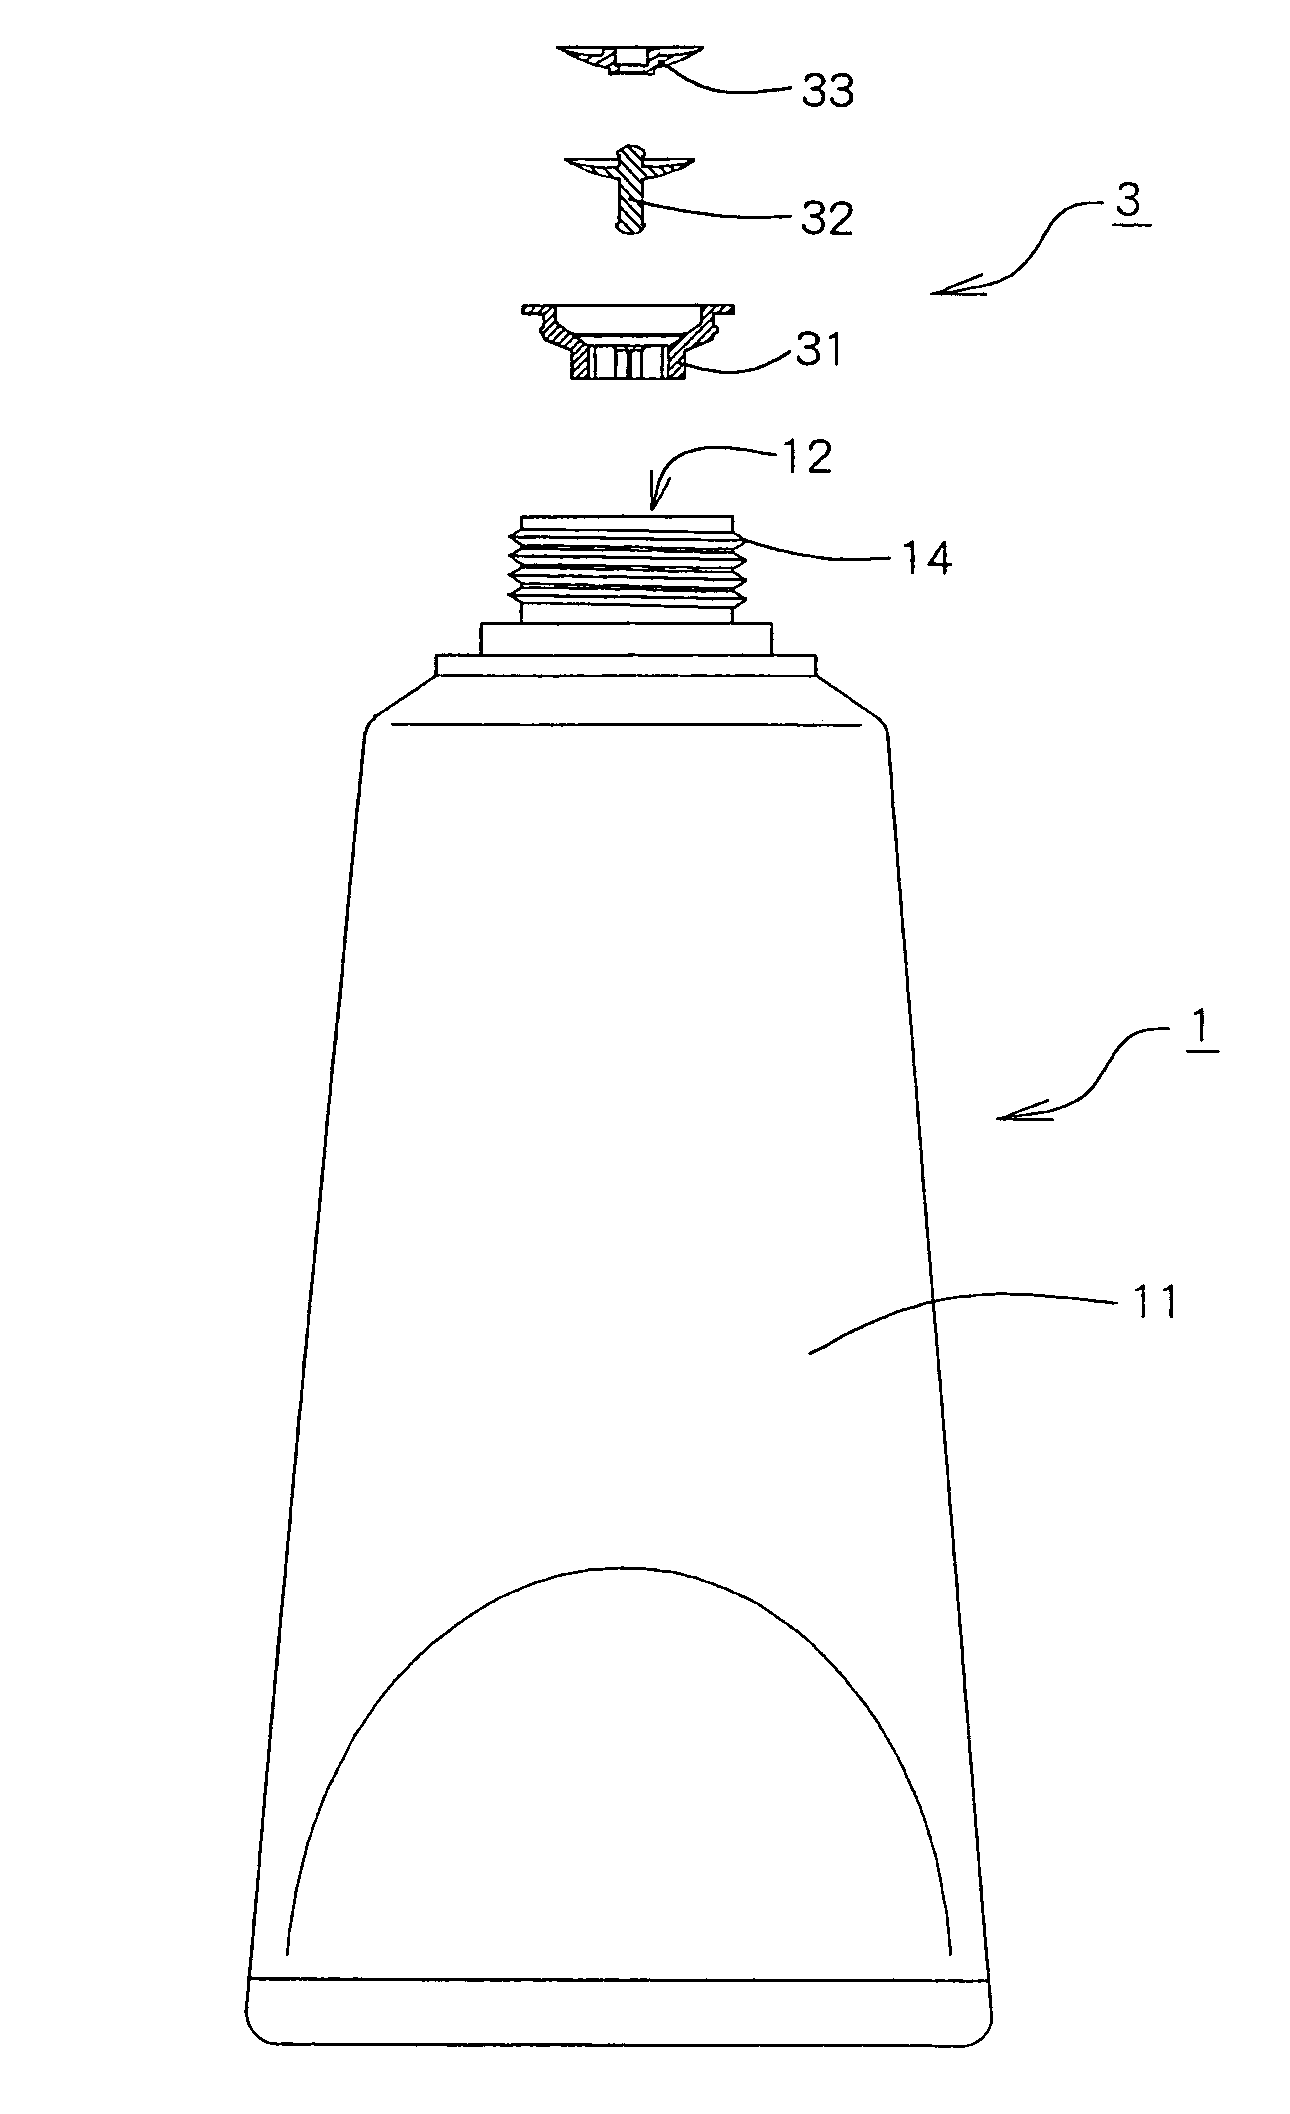 Fluid-storing container